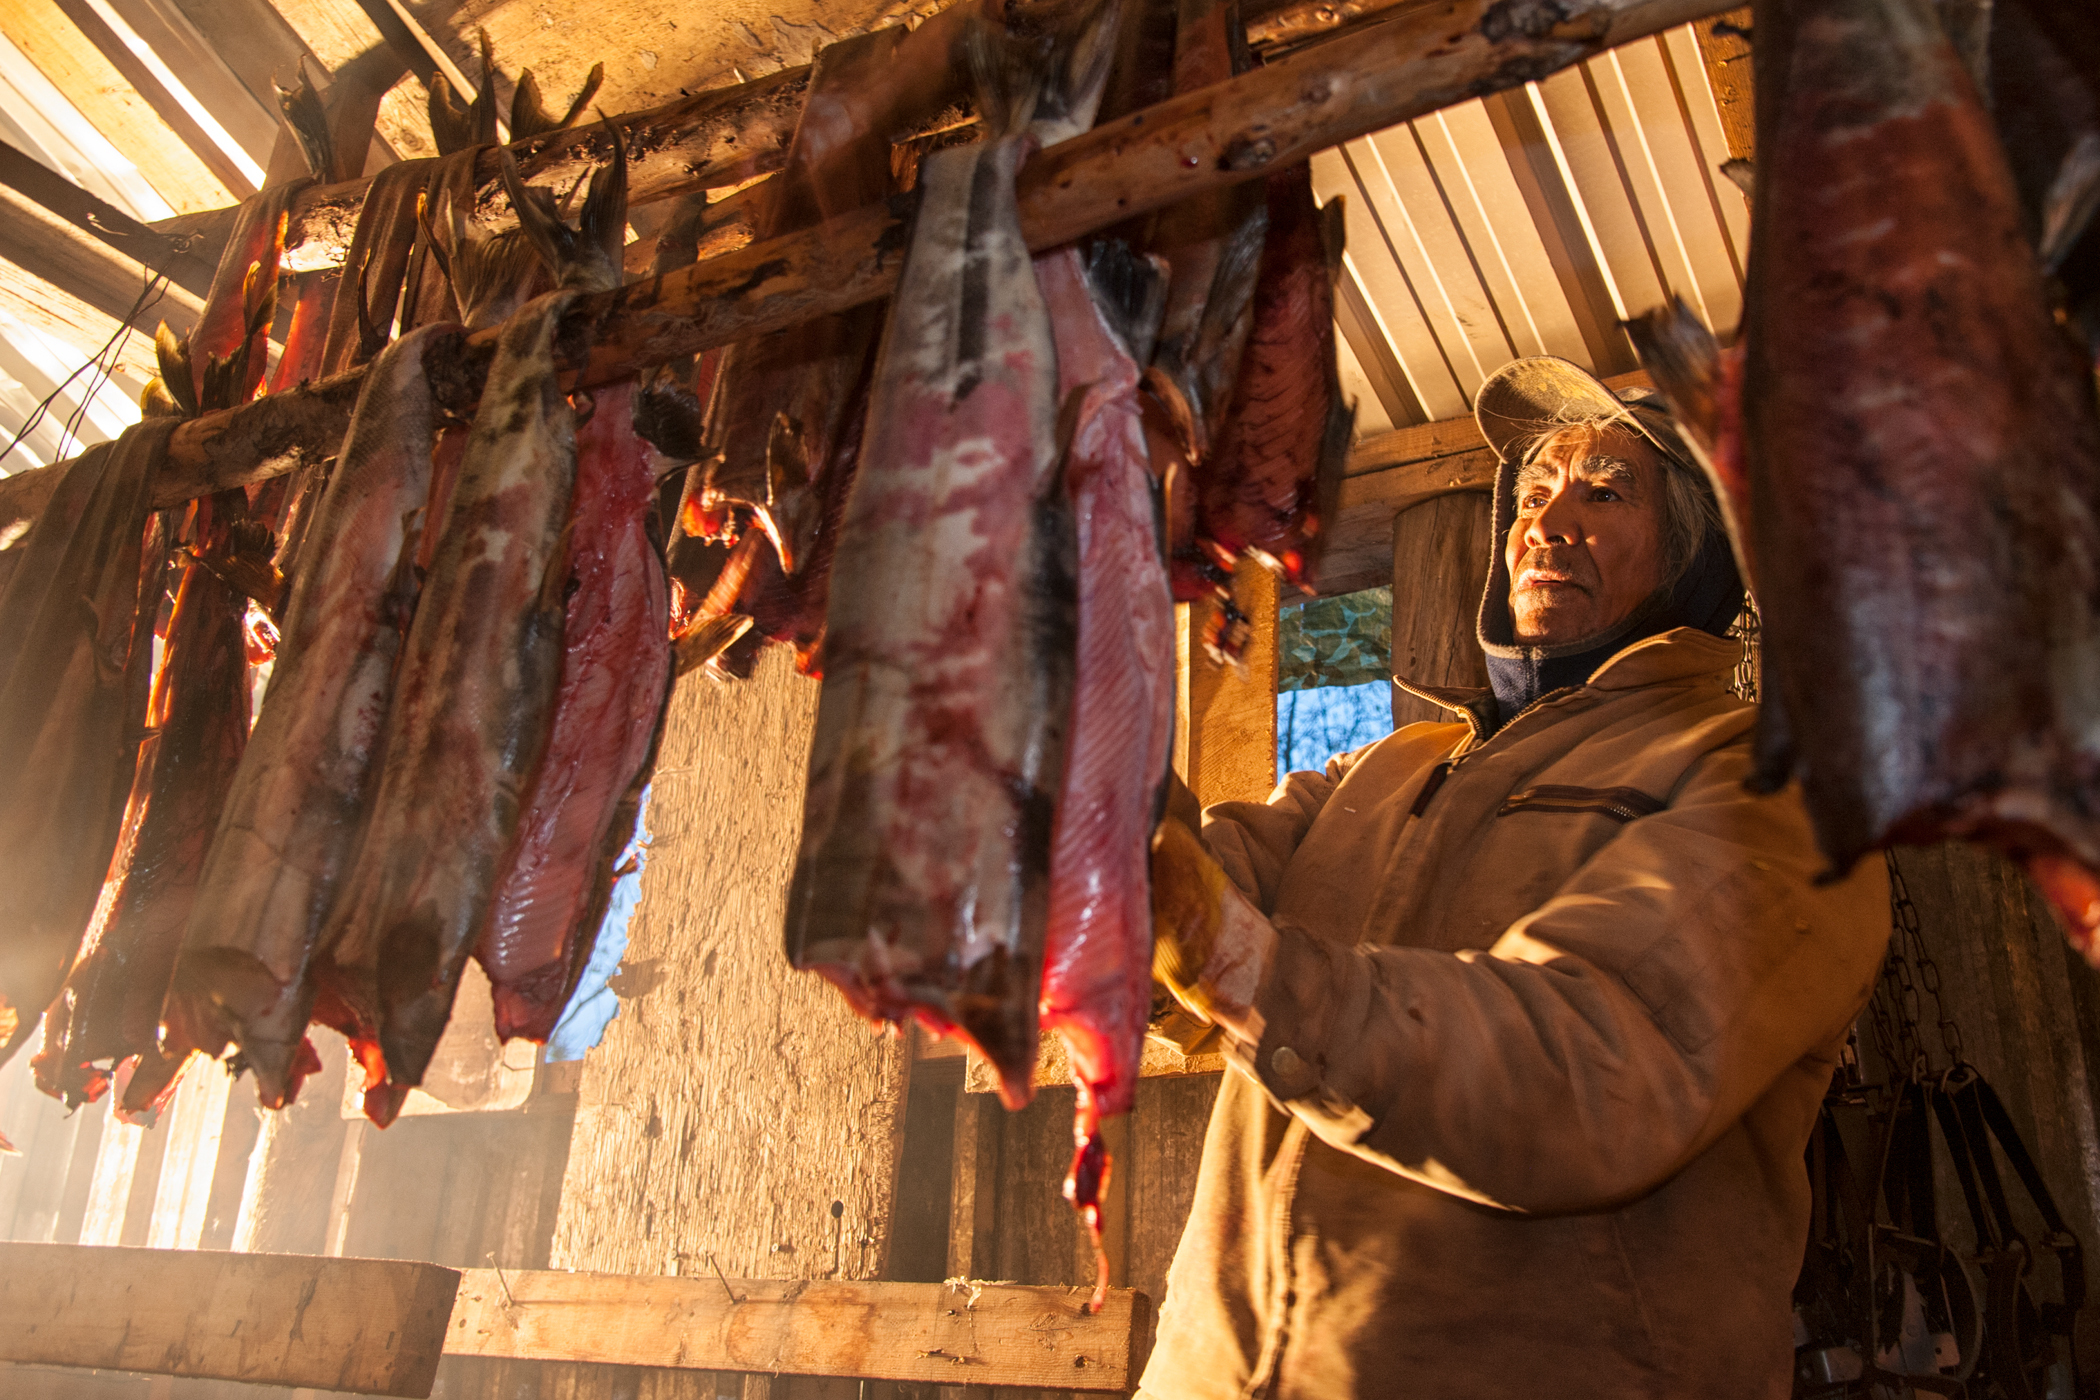 James Itsi hangs chum salmon for smoking in a shed